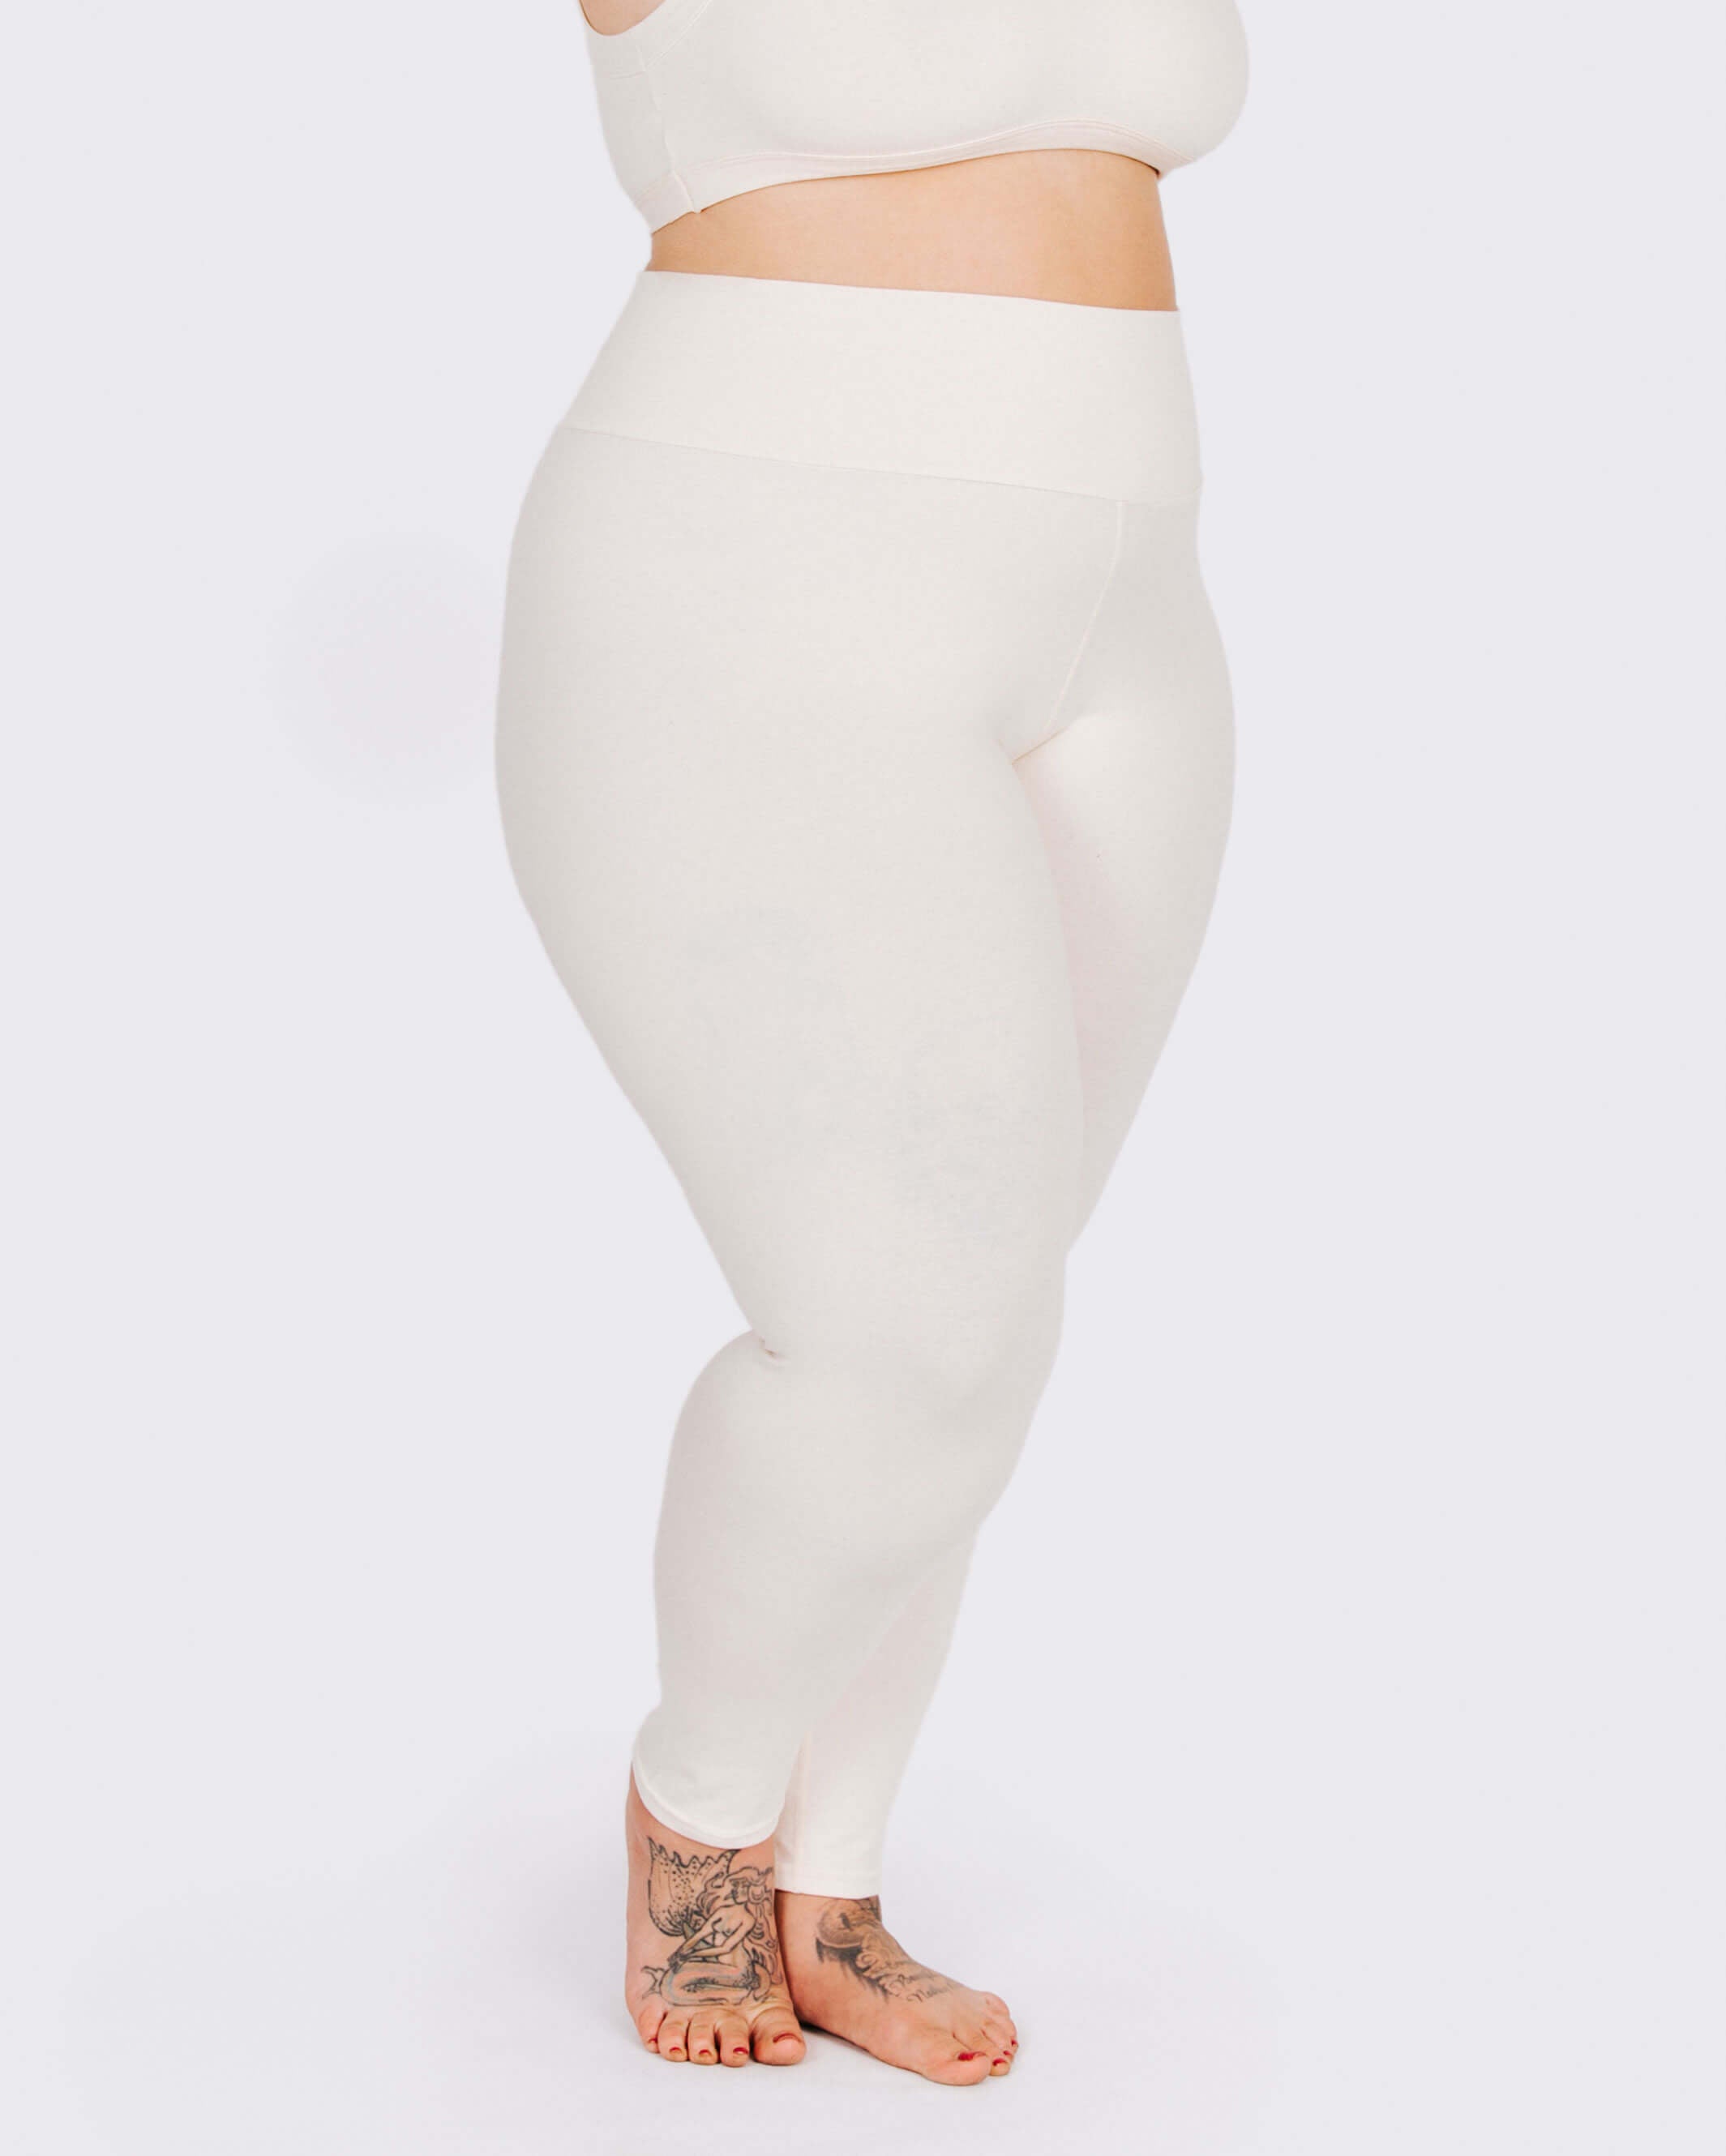 Fit photo from the front of Thunderpants organic cotton Leggings in off-white on a model.